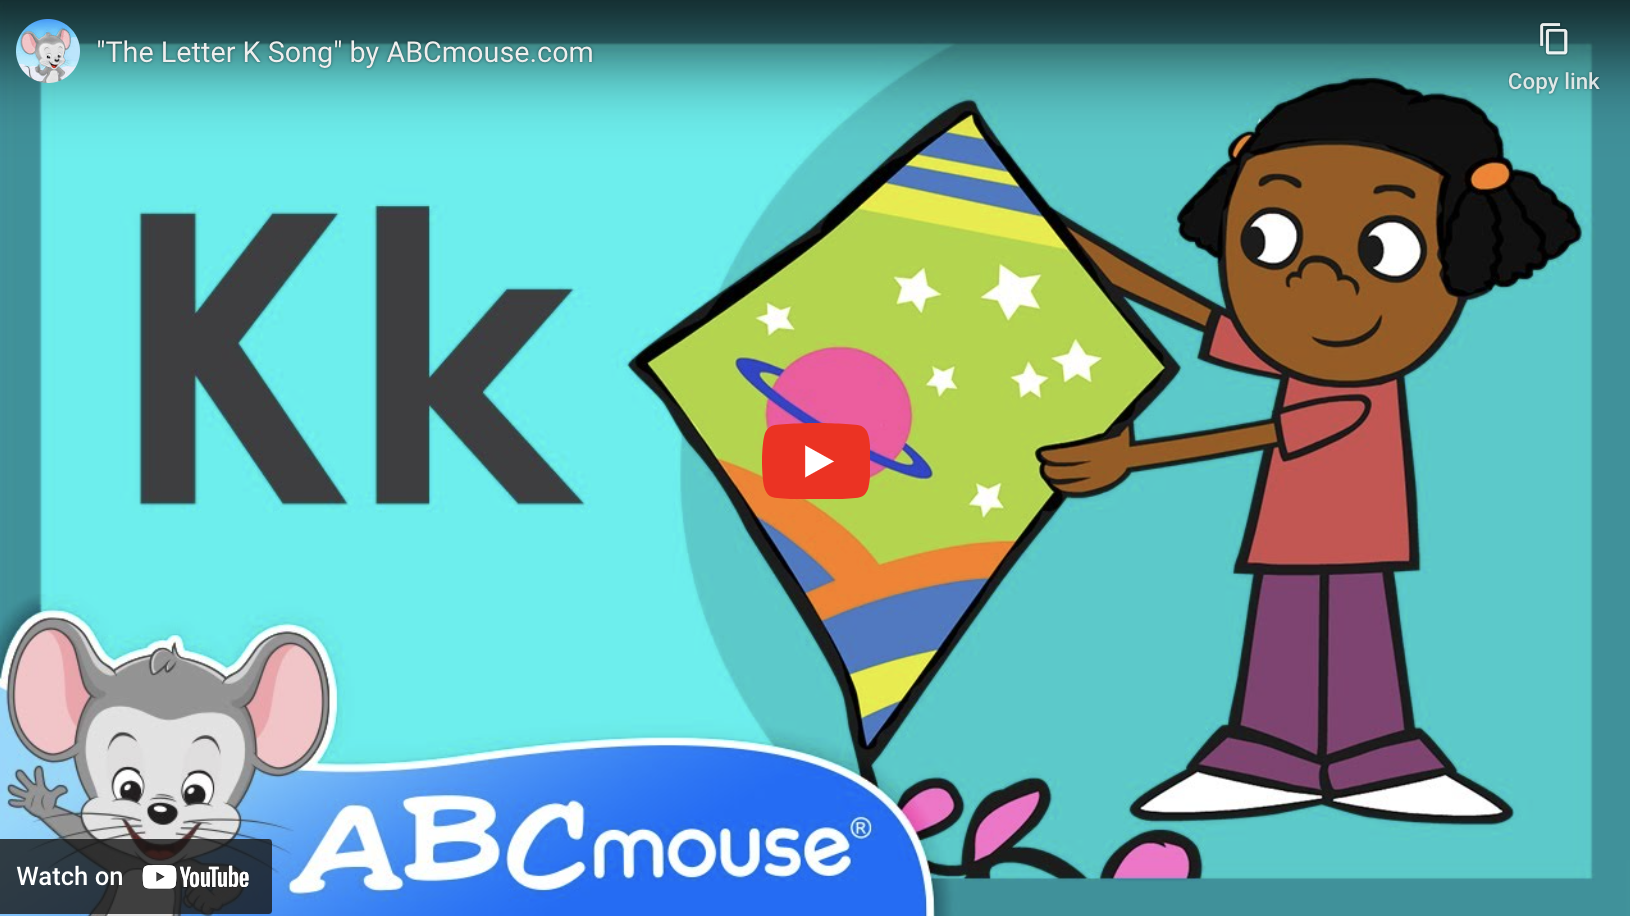 Letter K song for kids from ABCmouse.com. 